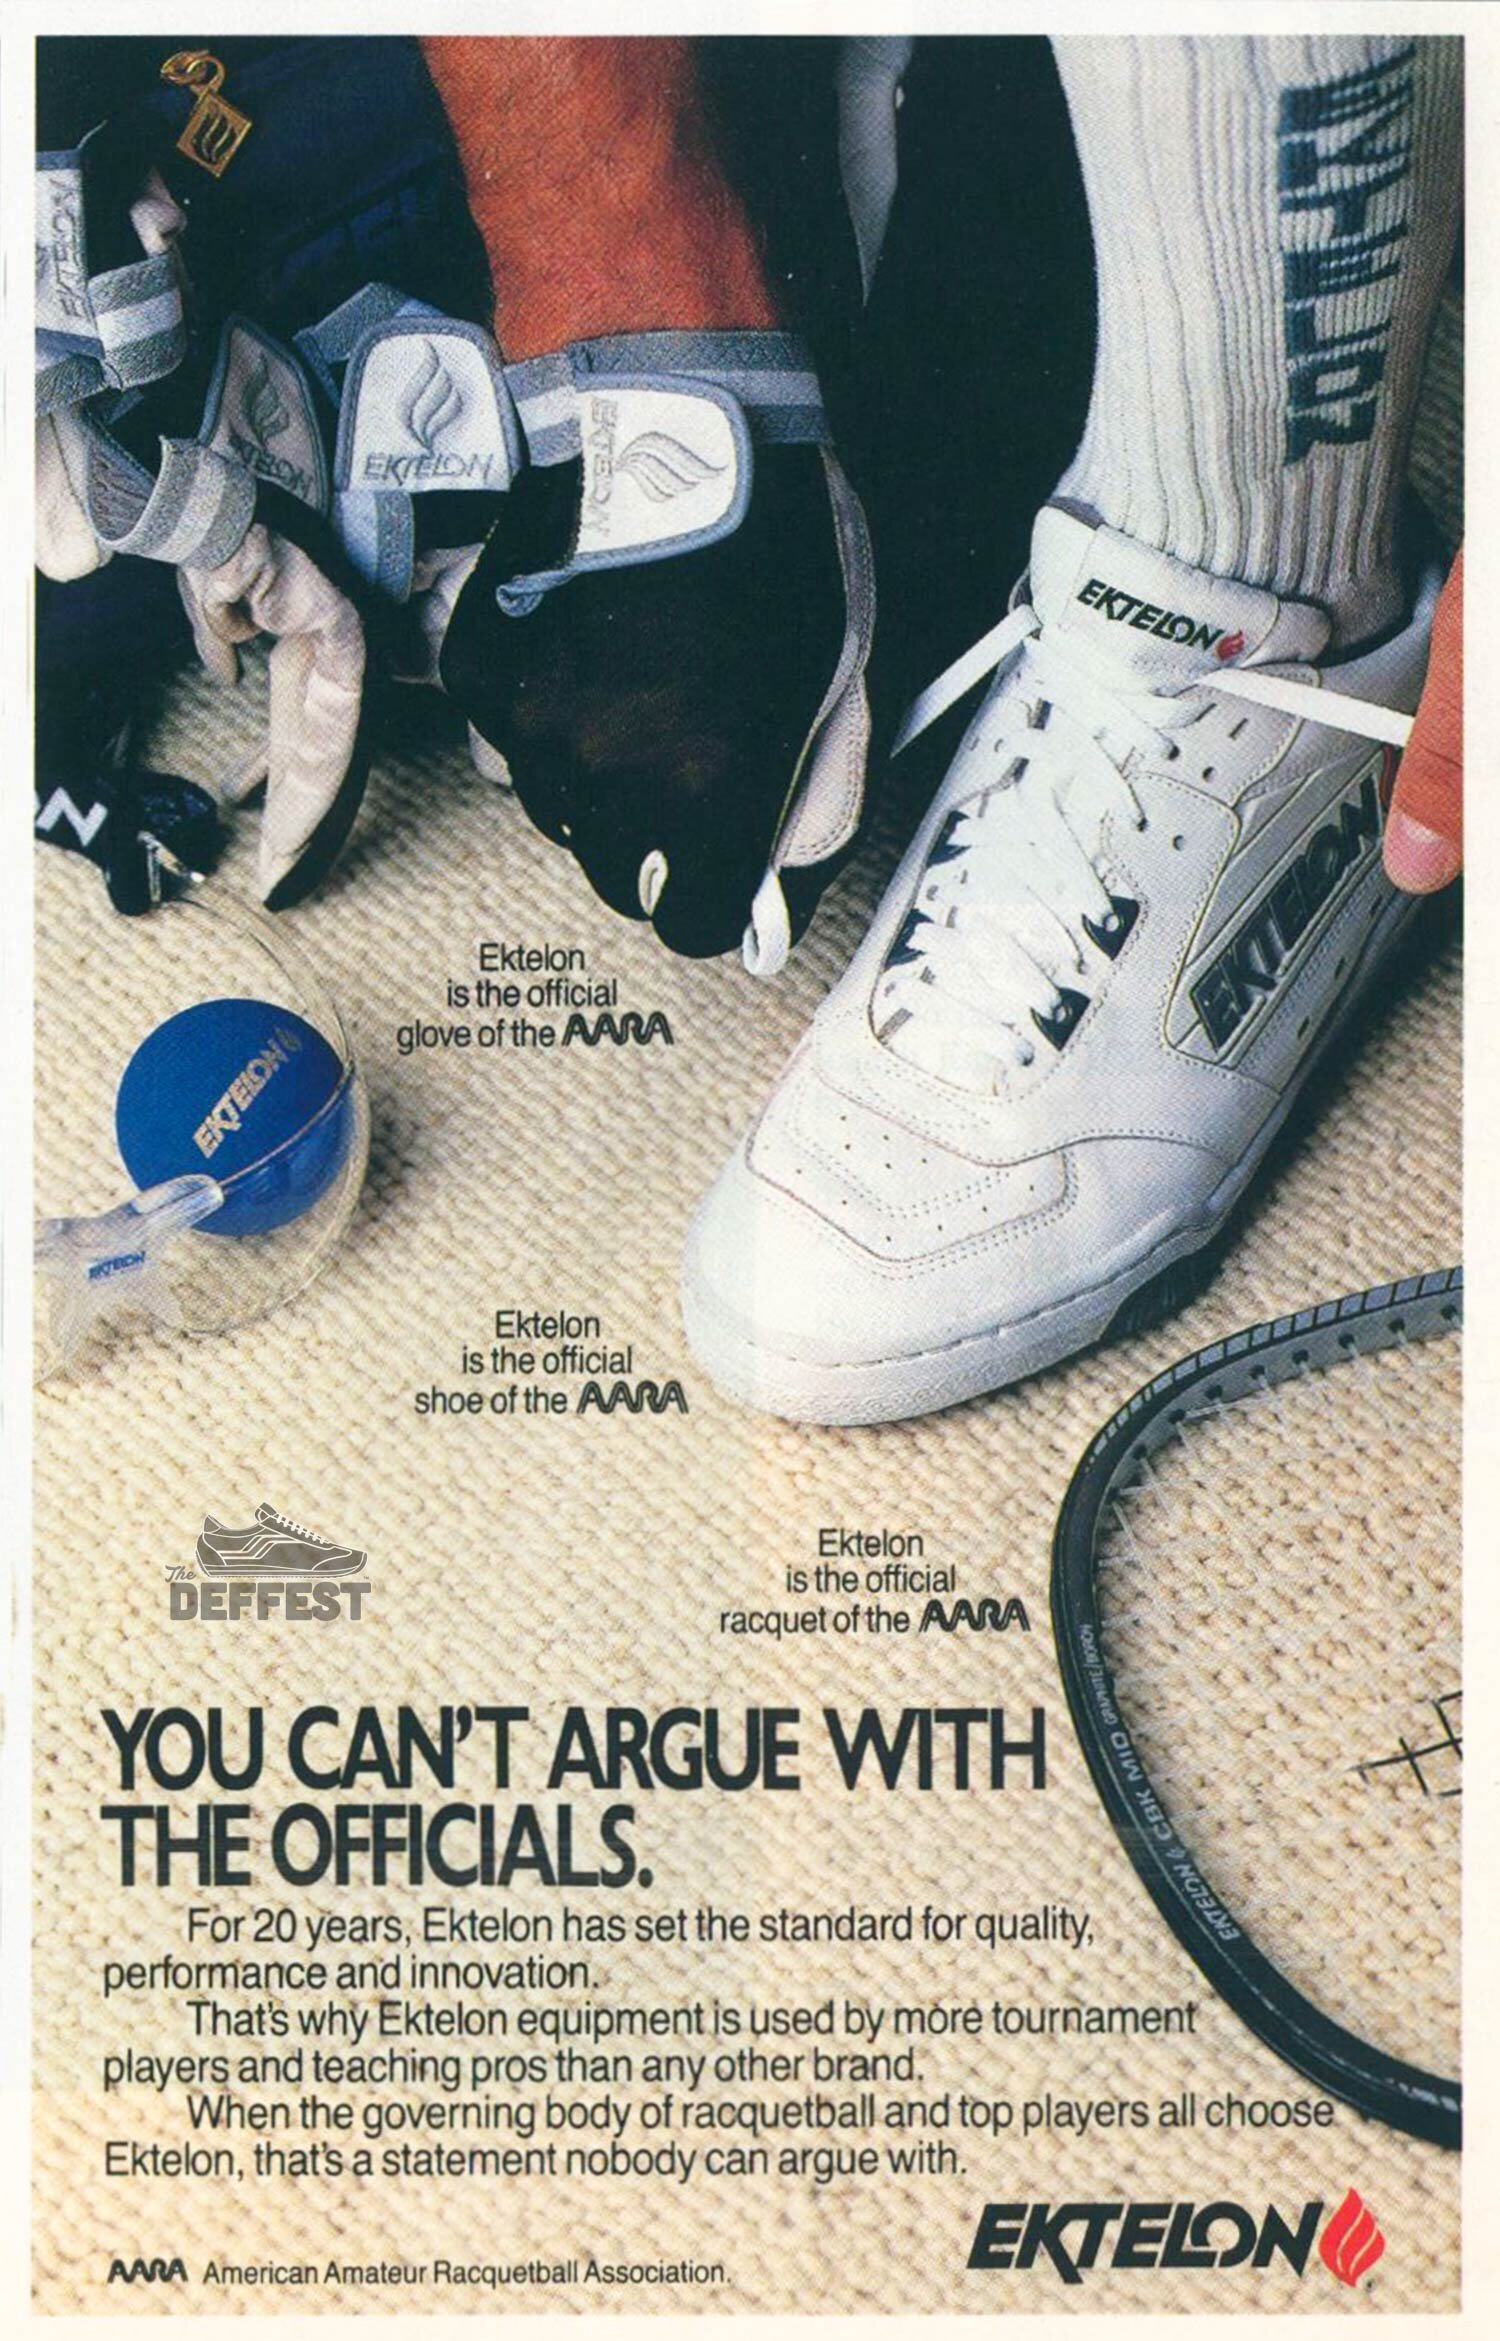 80s basketball shoes — The Deffest®. A vintage and retro sneaker blog. —  Vintage Ads